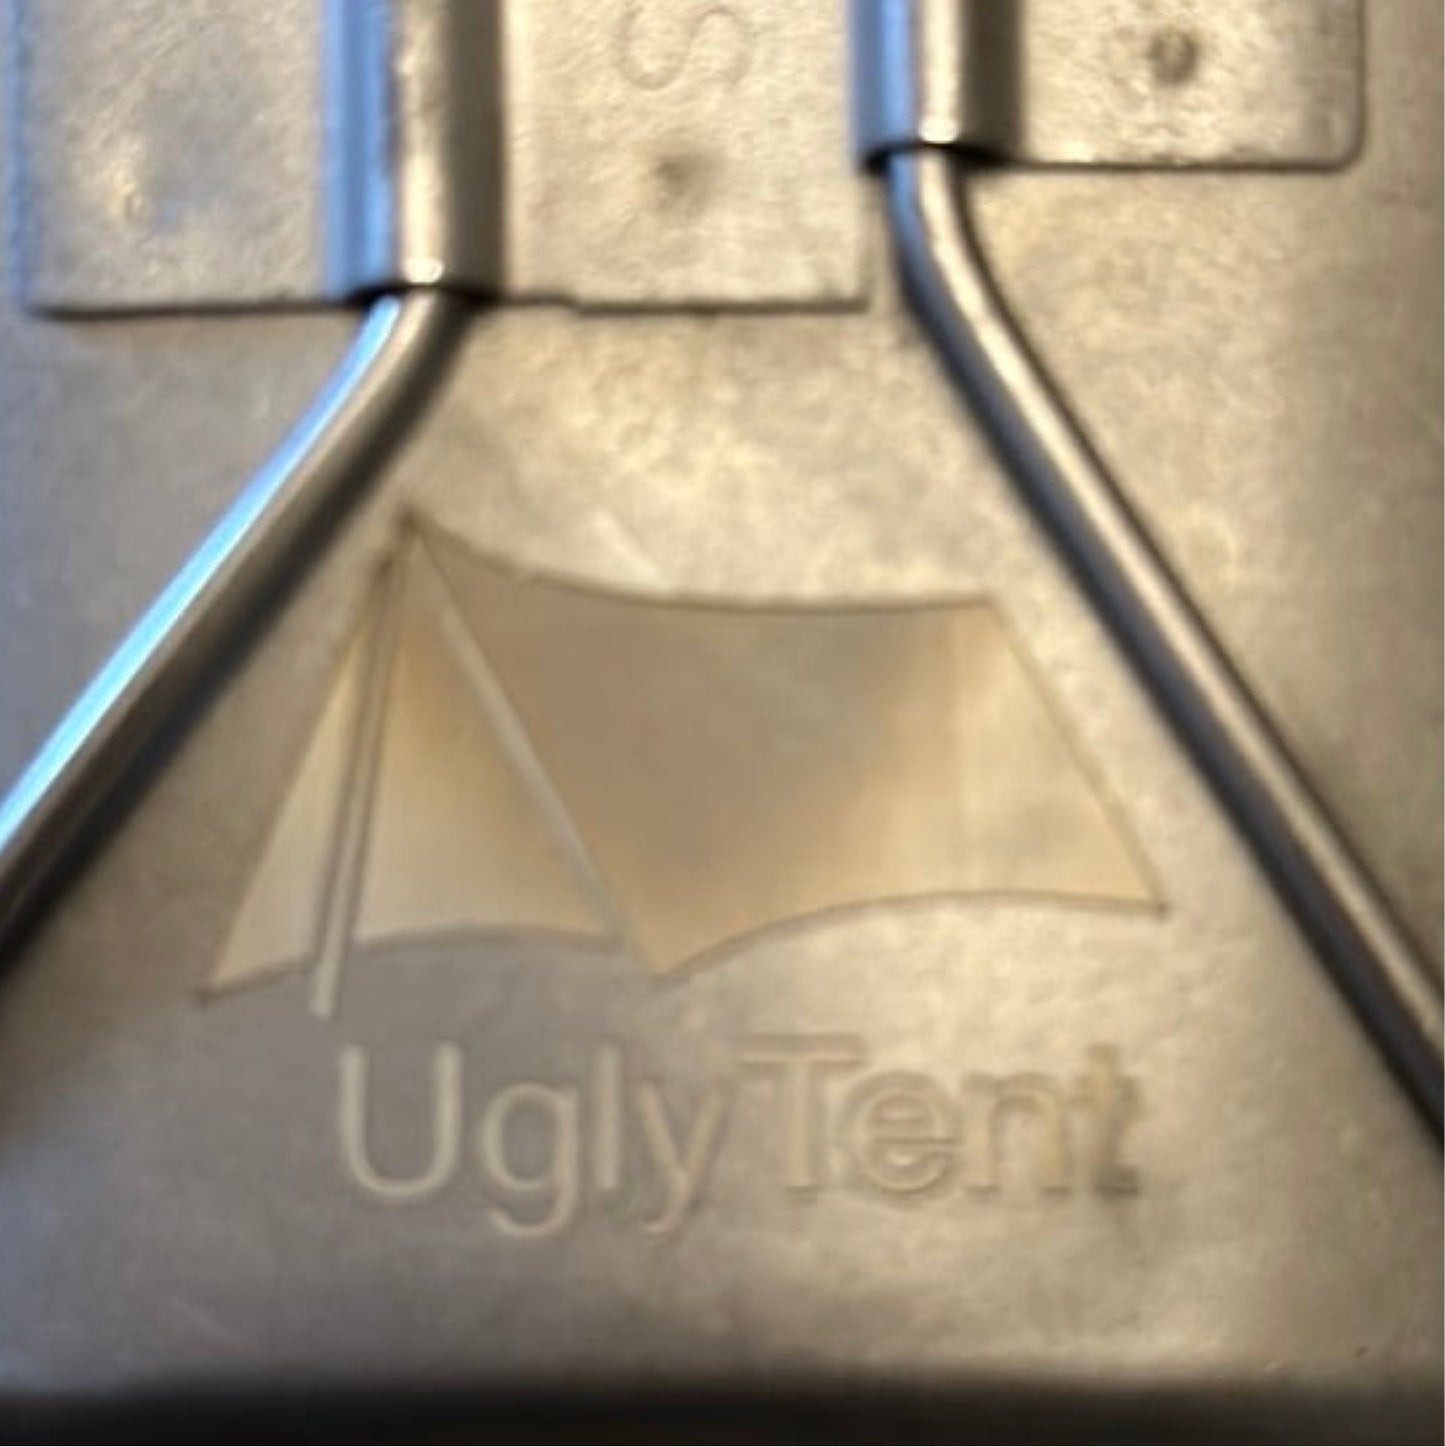 UglyTent Canteen Cup